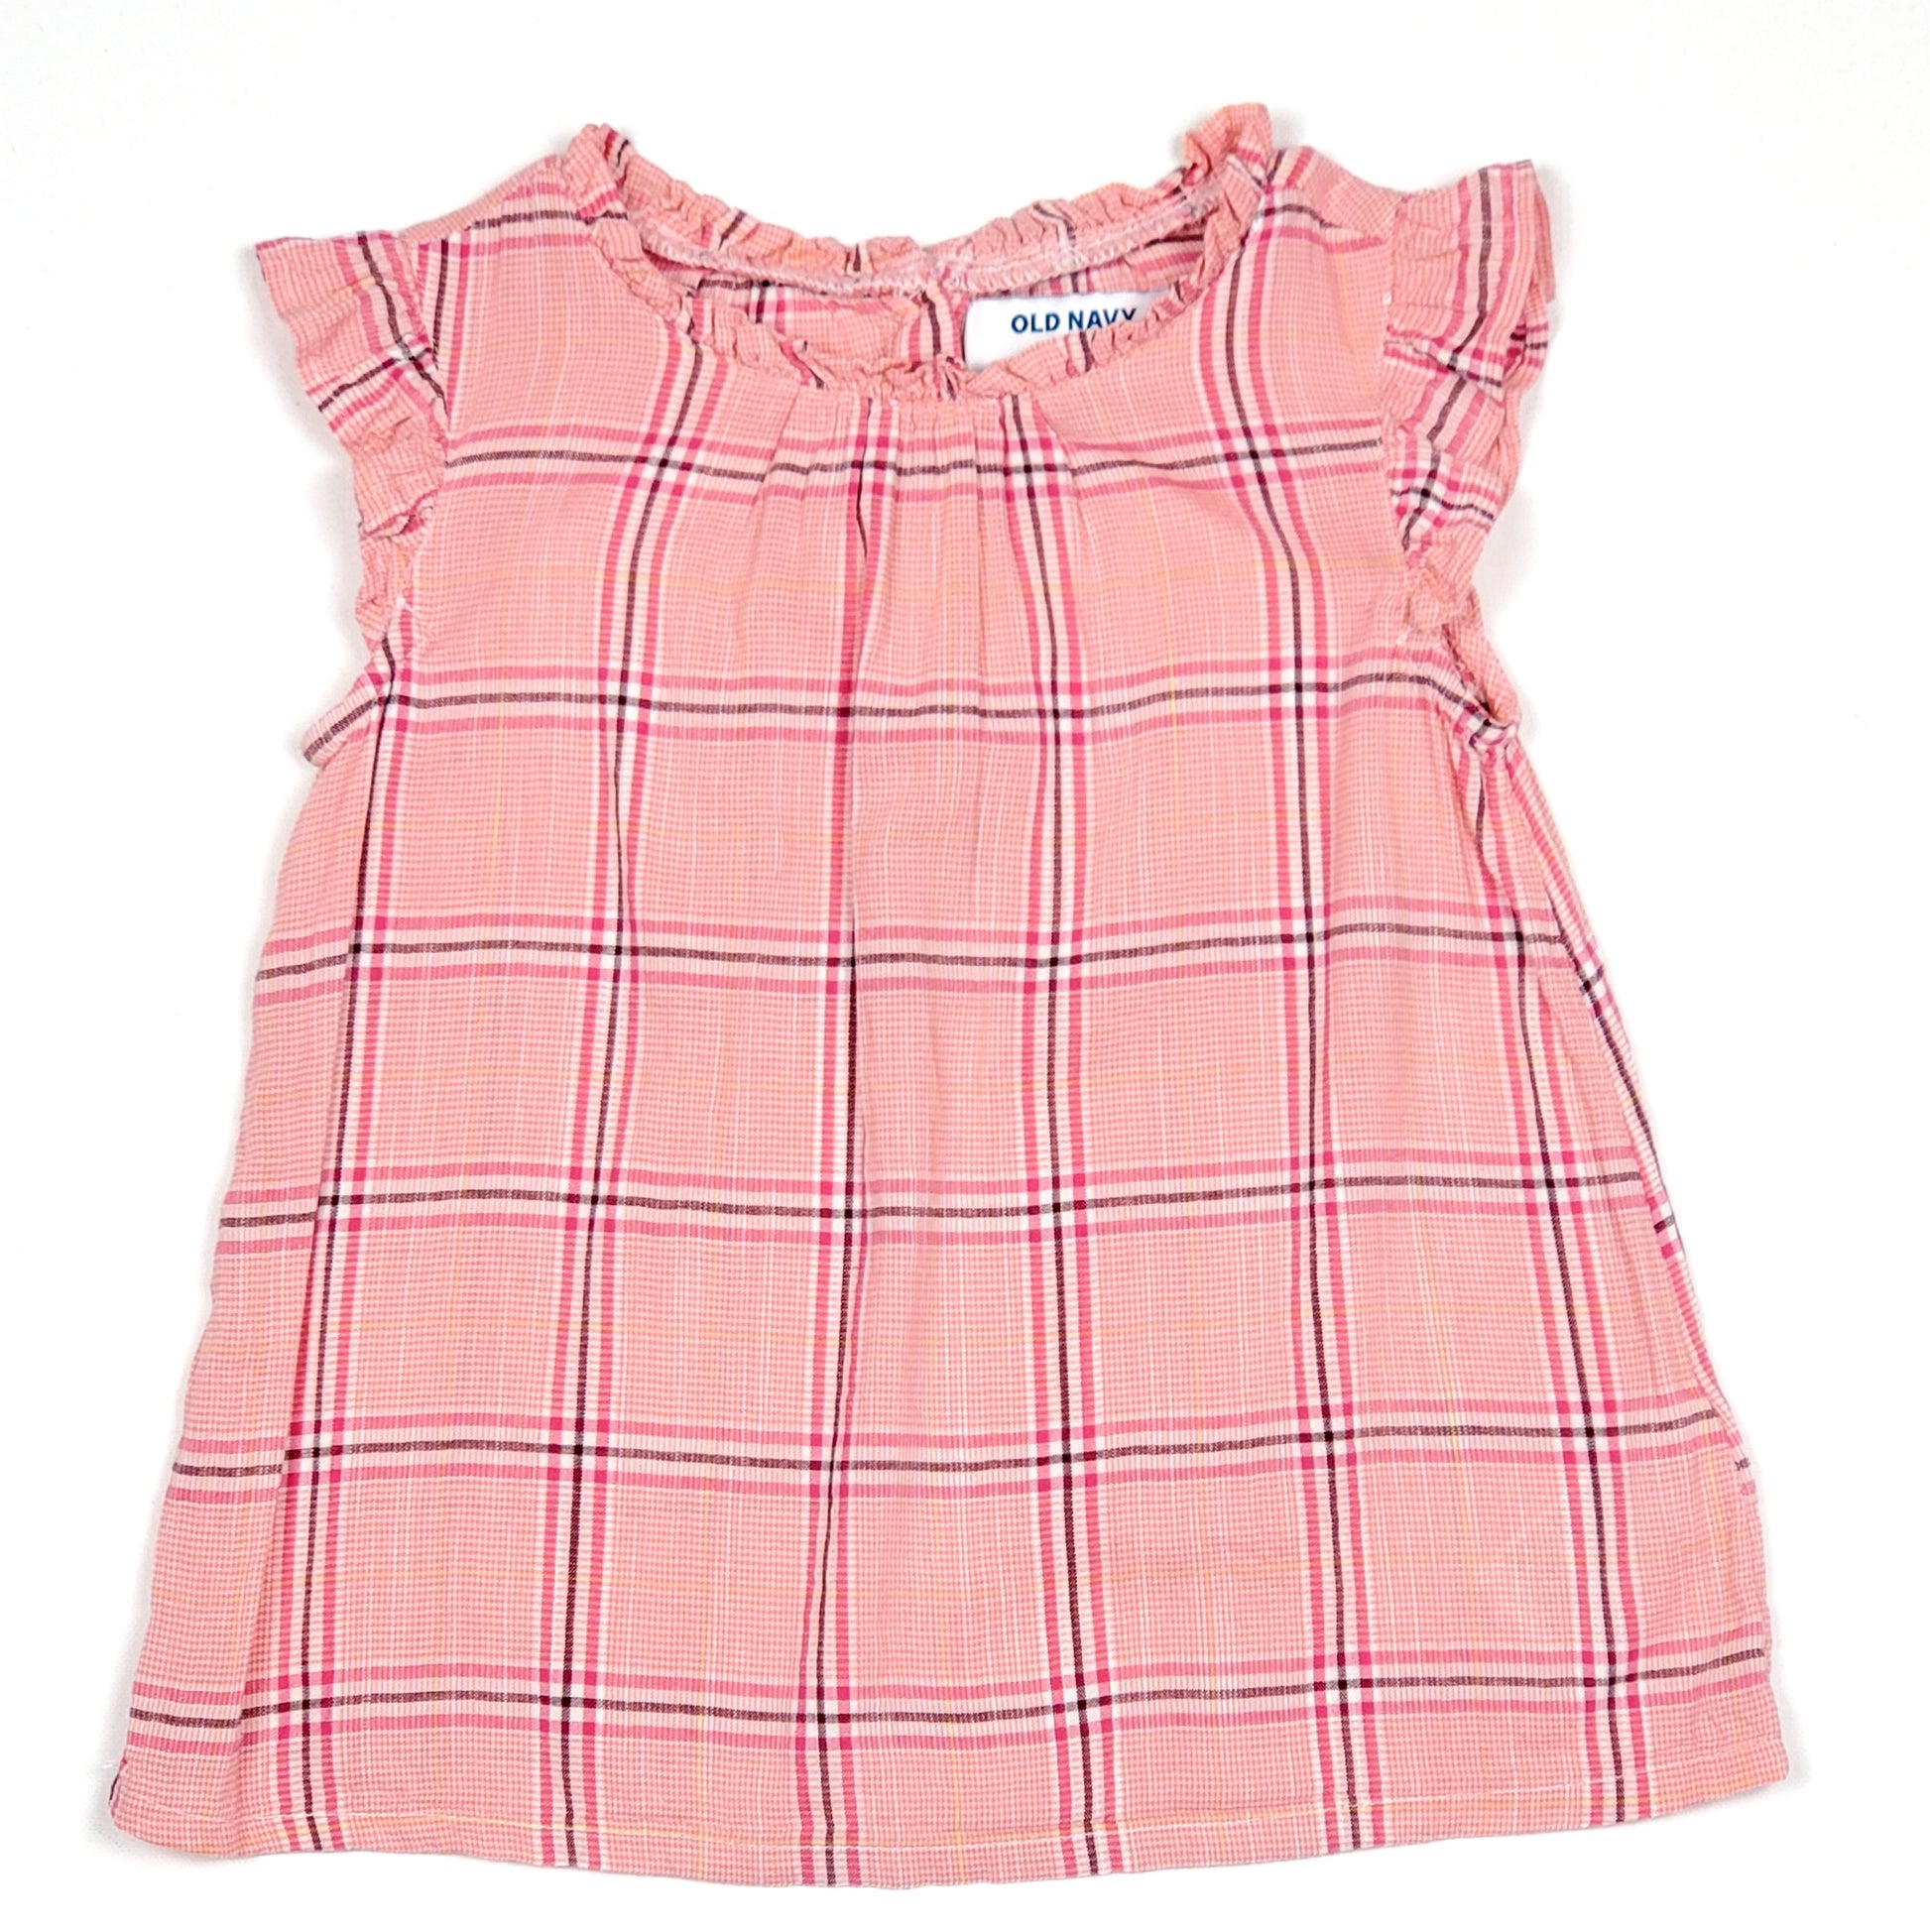 Old Navy Girls Pink Plaid Top 5T Used View 1